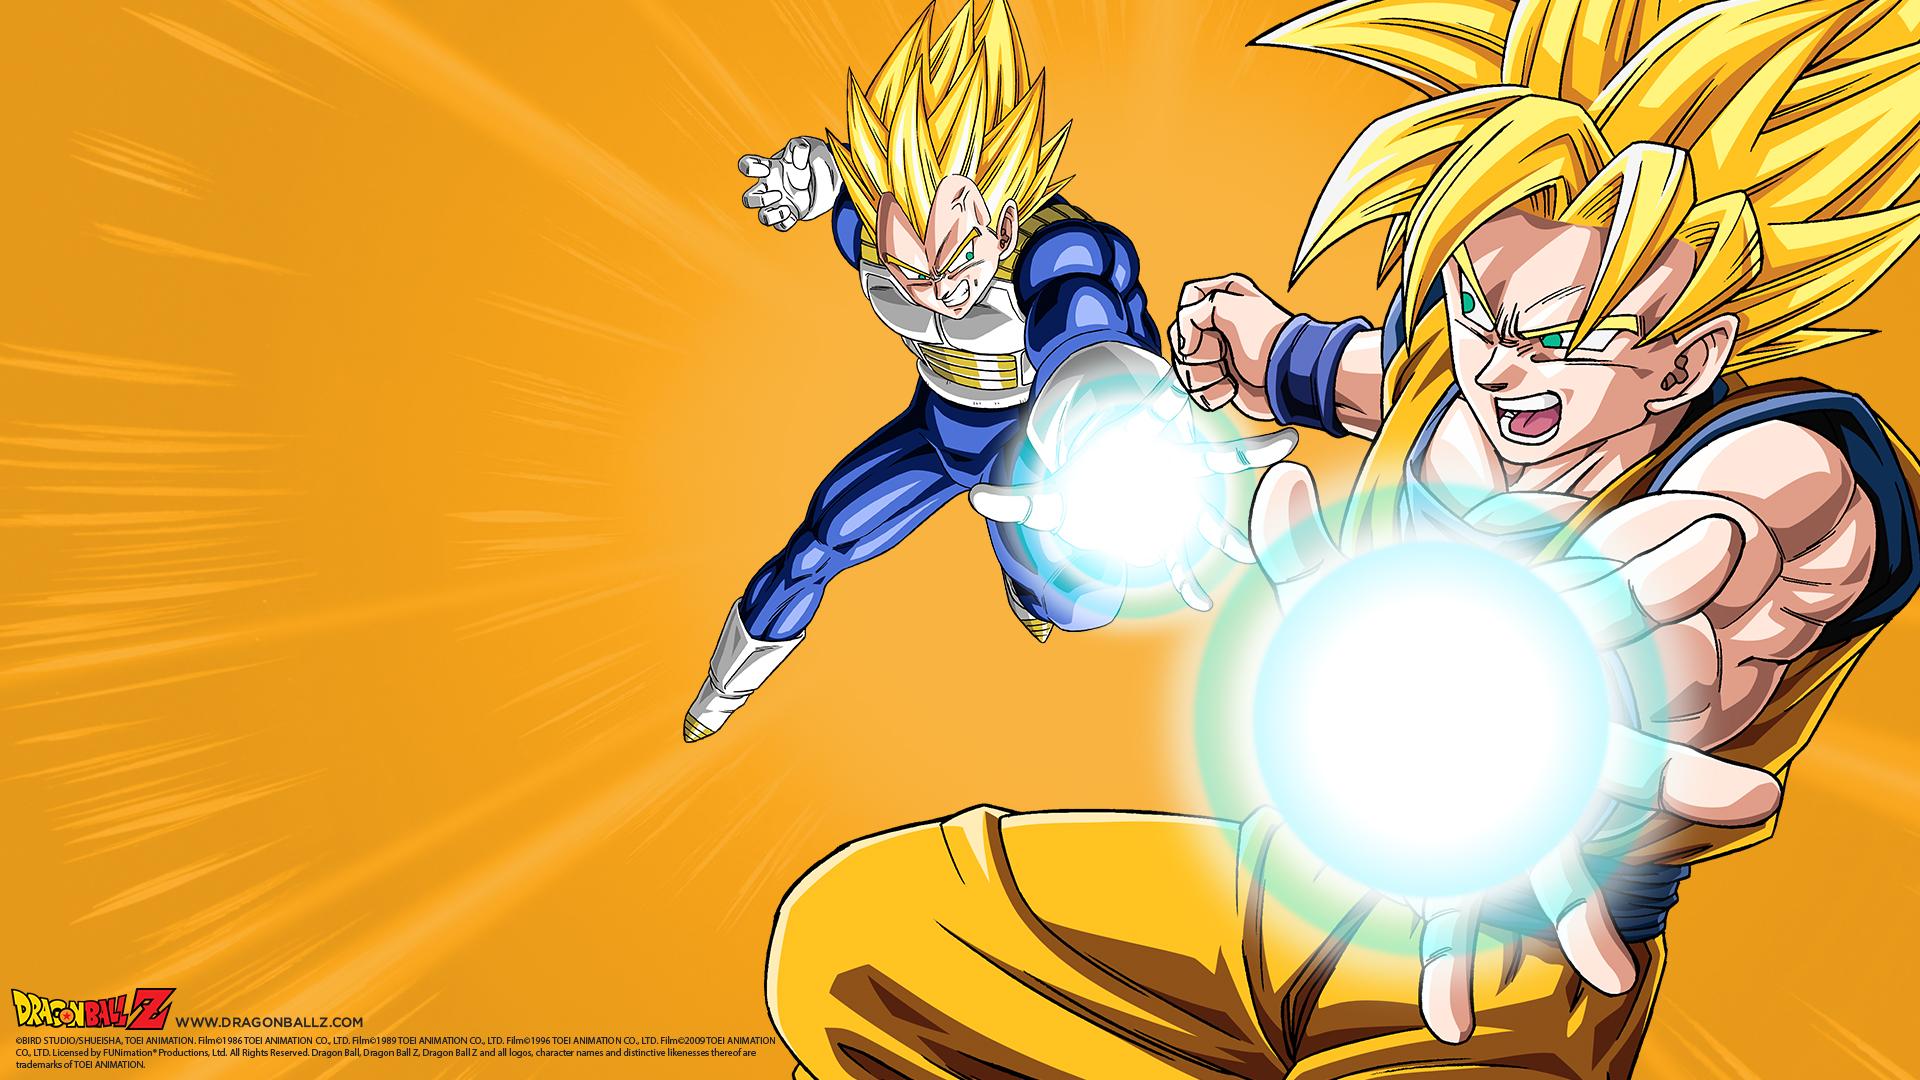 Live Dragon Ball Z Wallpaper For Iphone - Moving Wallpapers Dragon Ball Z -  1920x1080 Wallpaper 